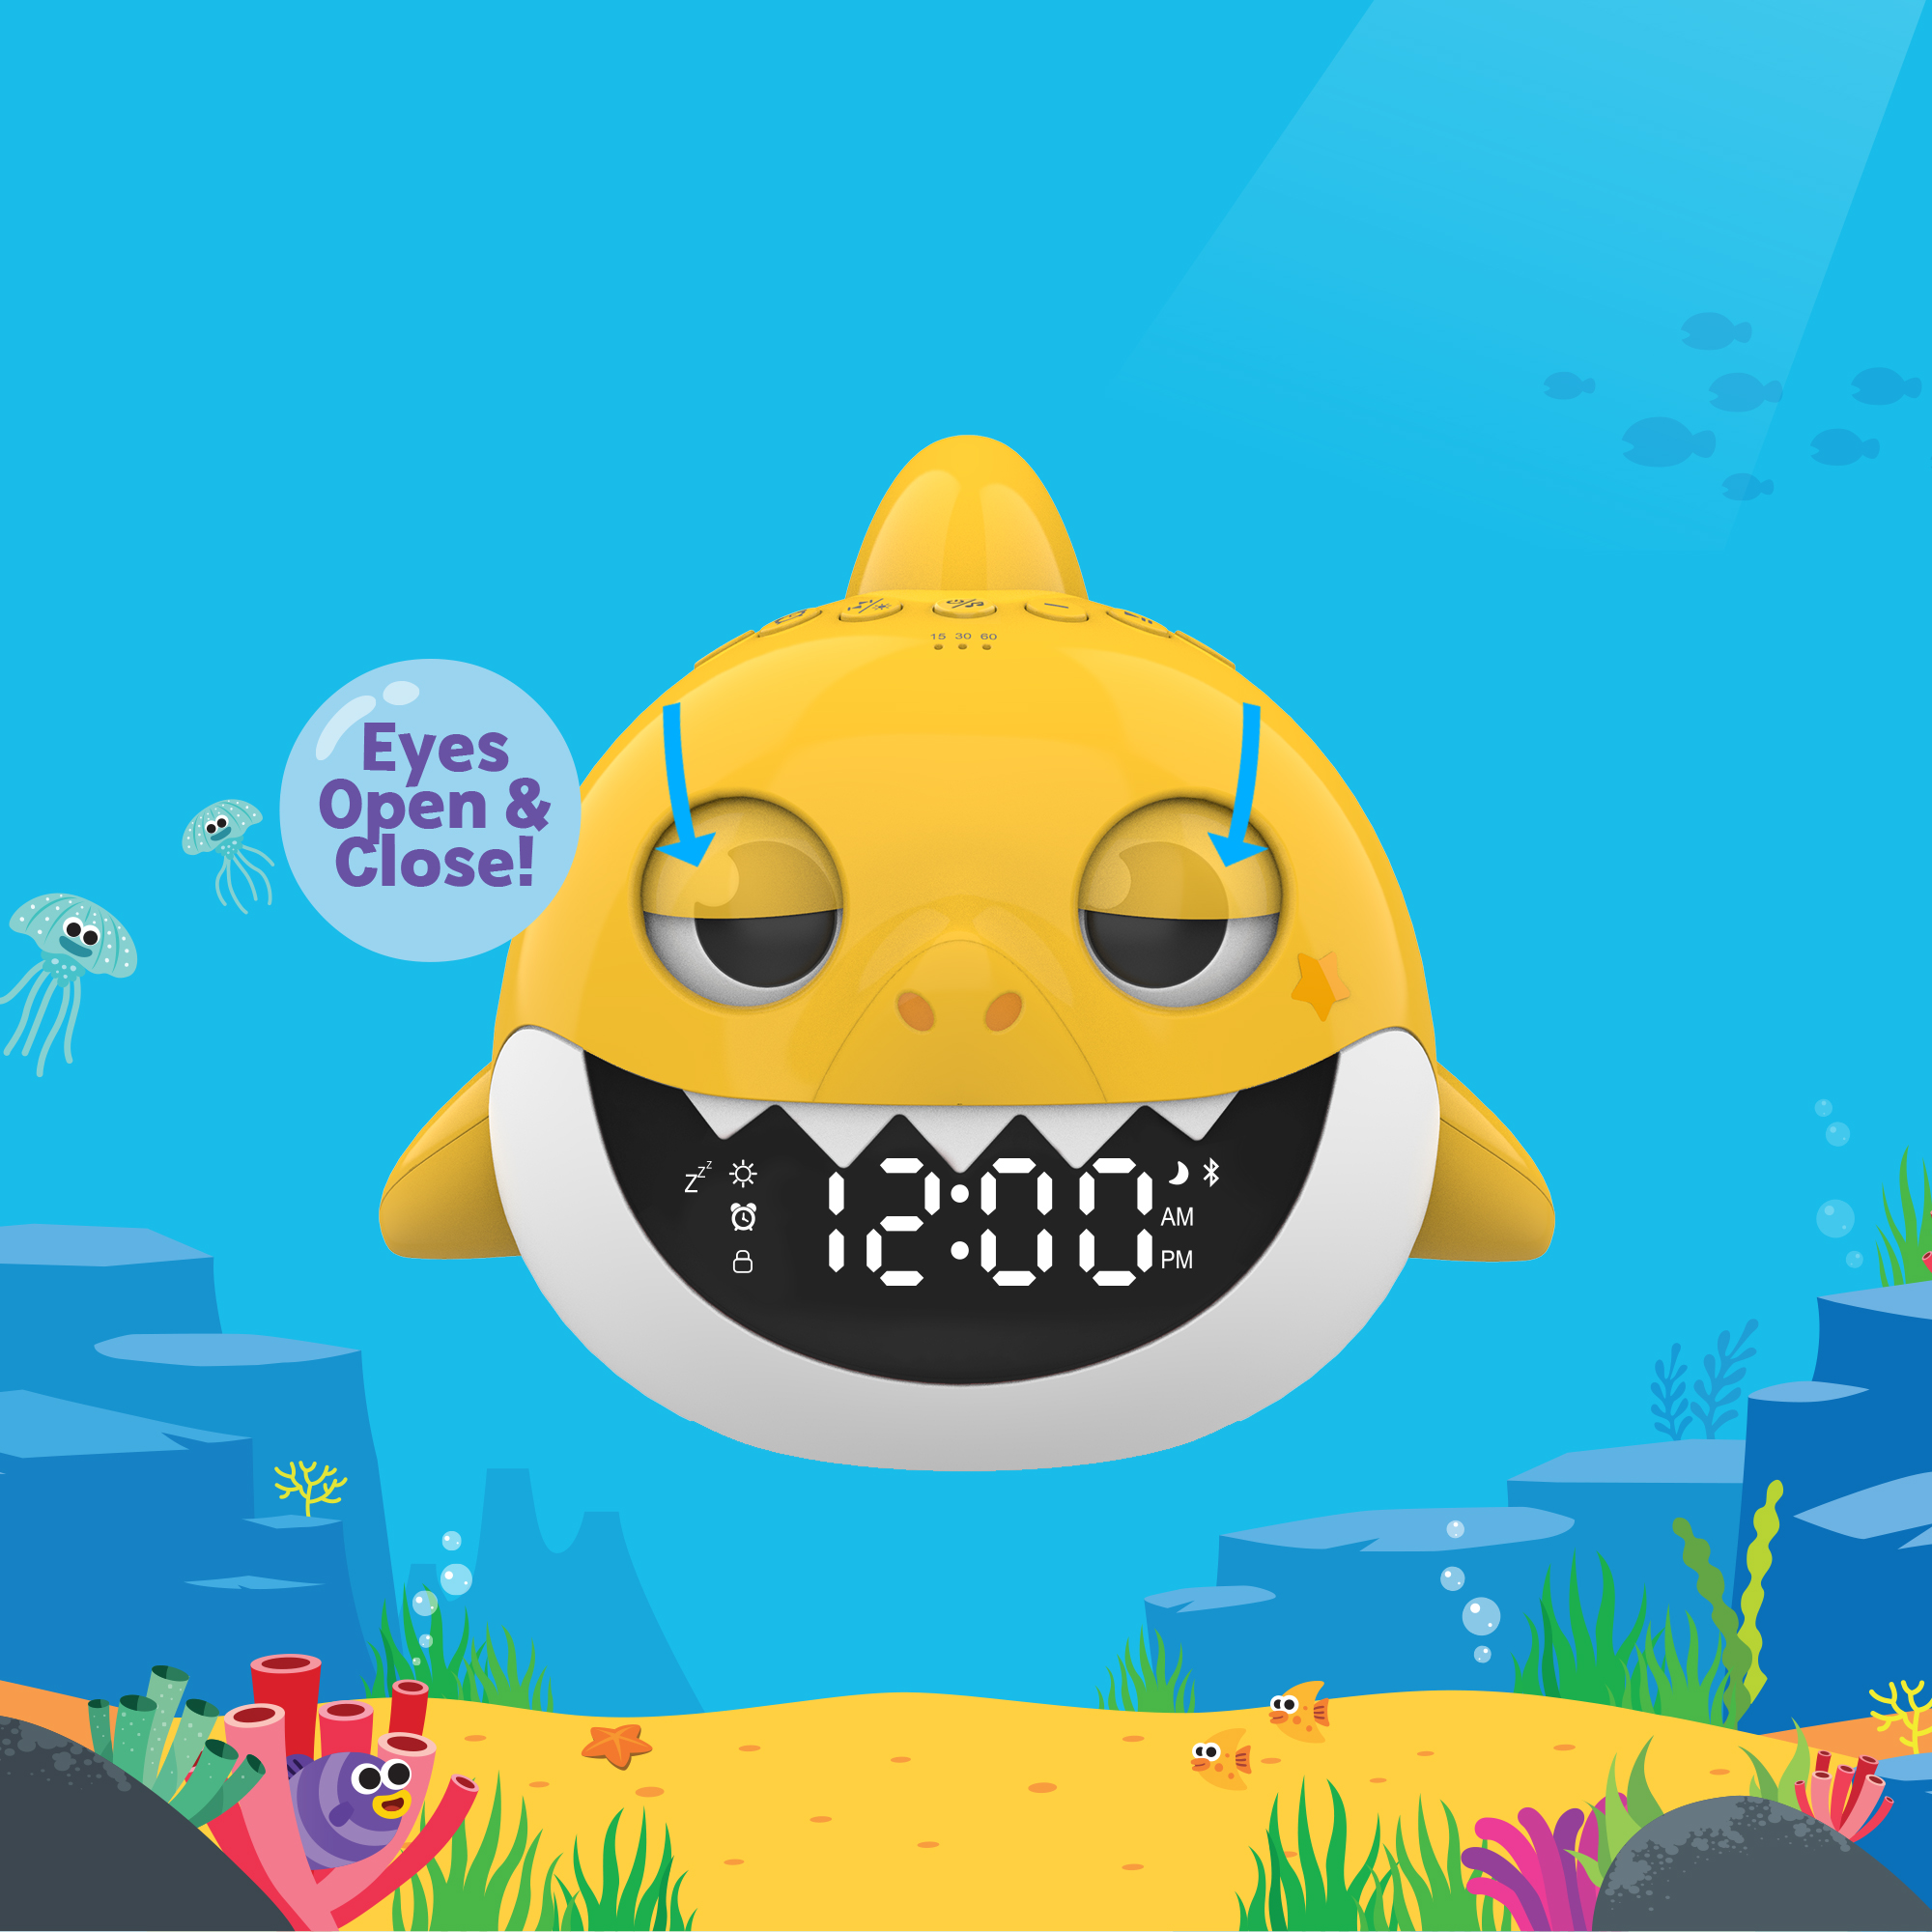 Nickelodeon Pink Fong Baby Shark Bluetooth Speaker with Digital Alarm Clock, White Noise - image 3 of 12